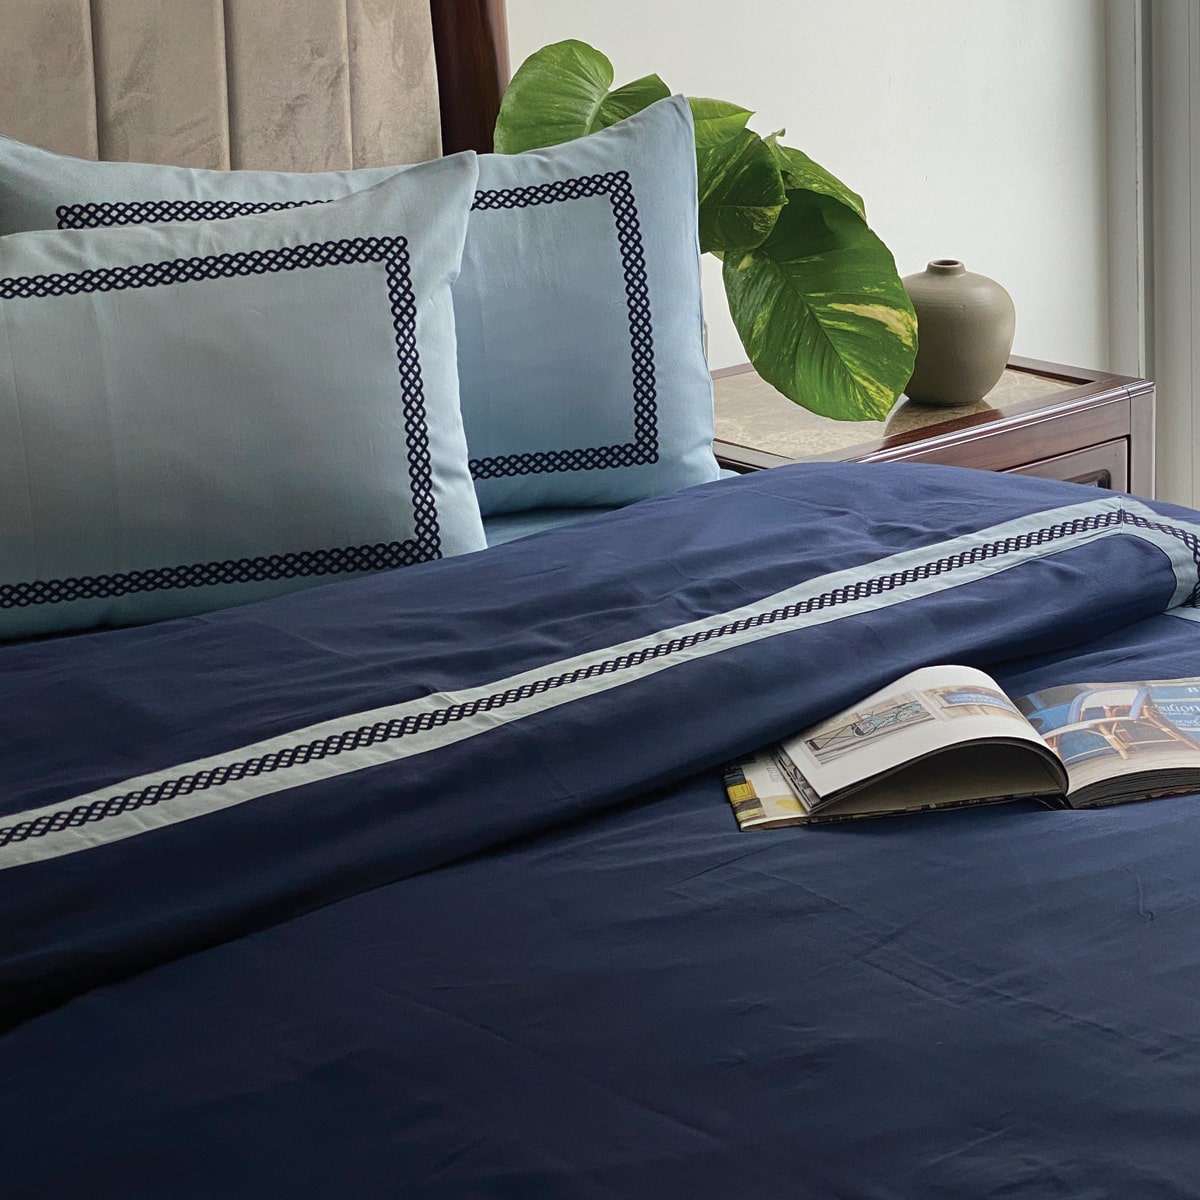 Droplet Smoke Blue and Navy Dreams Duvet Cover